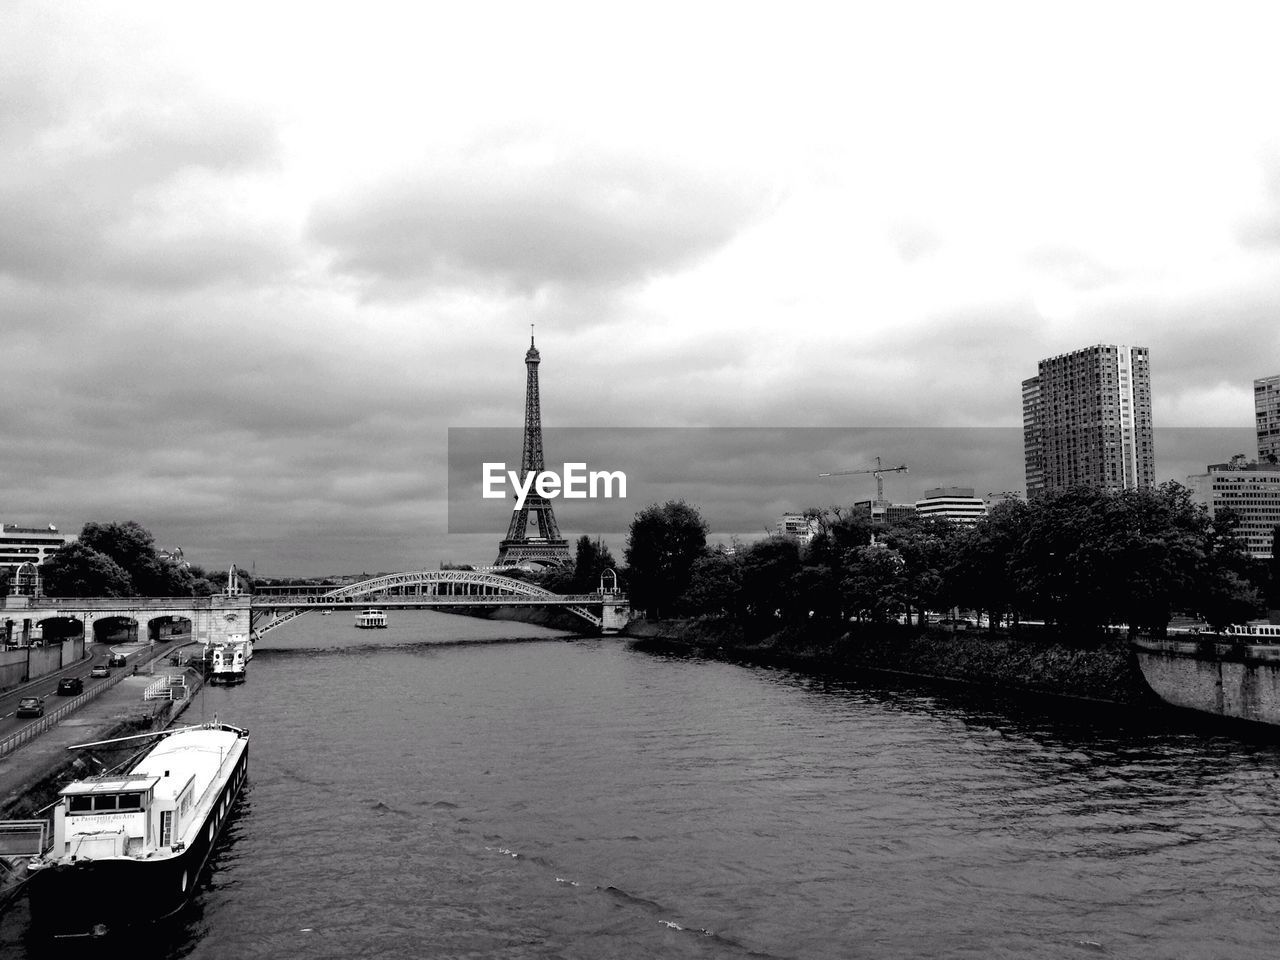 Boats moored on river with eiffel tower in background against sky